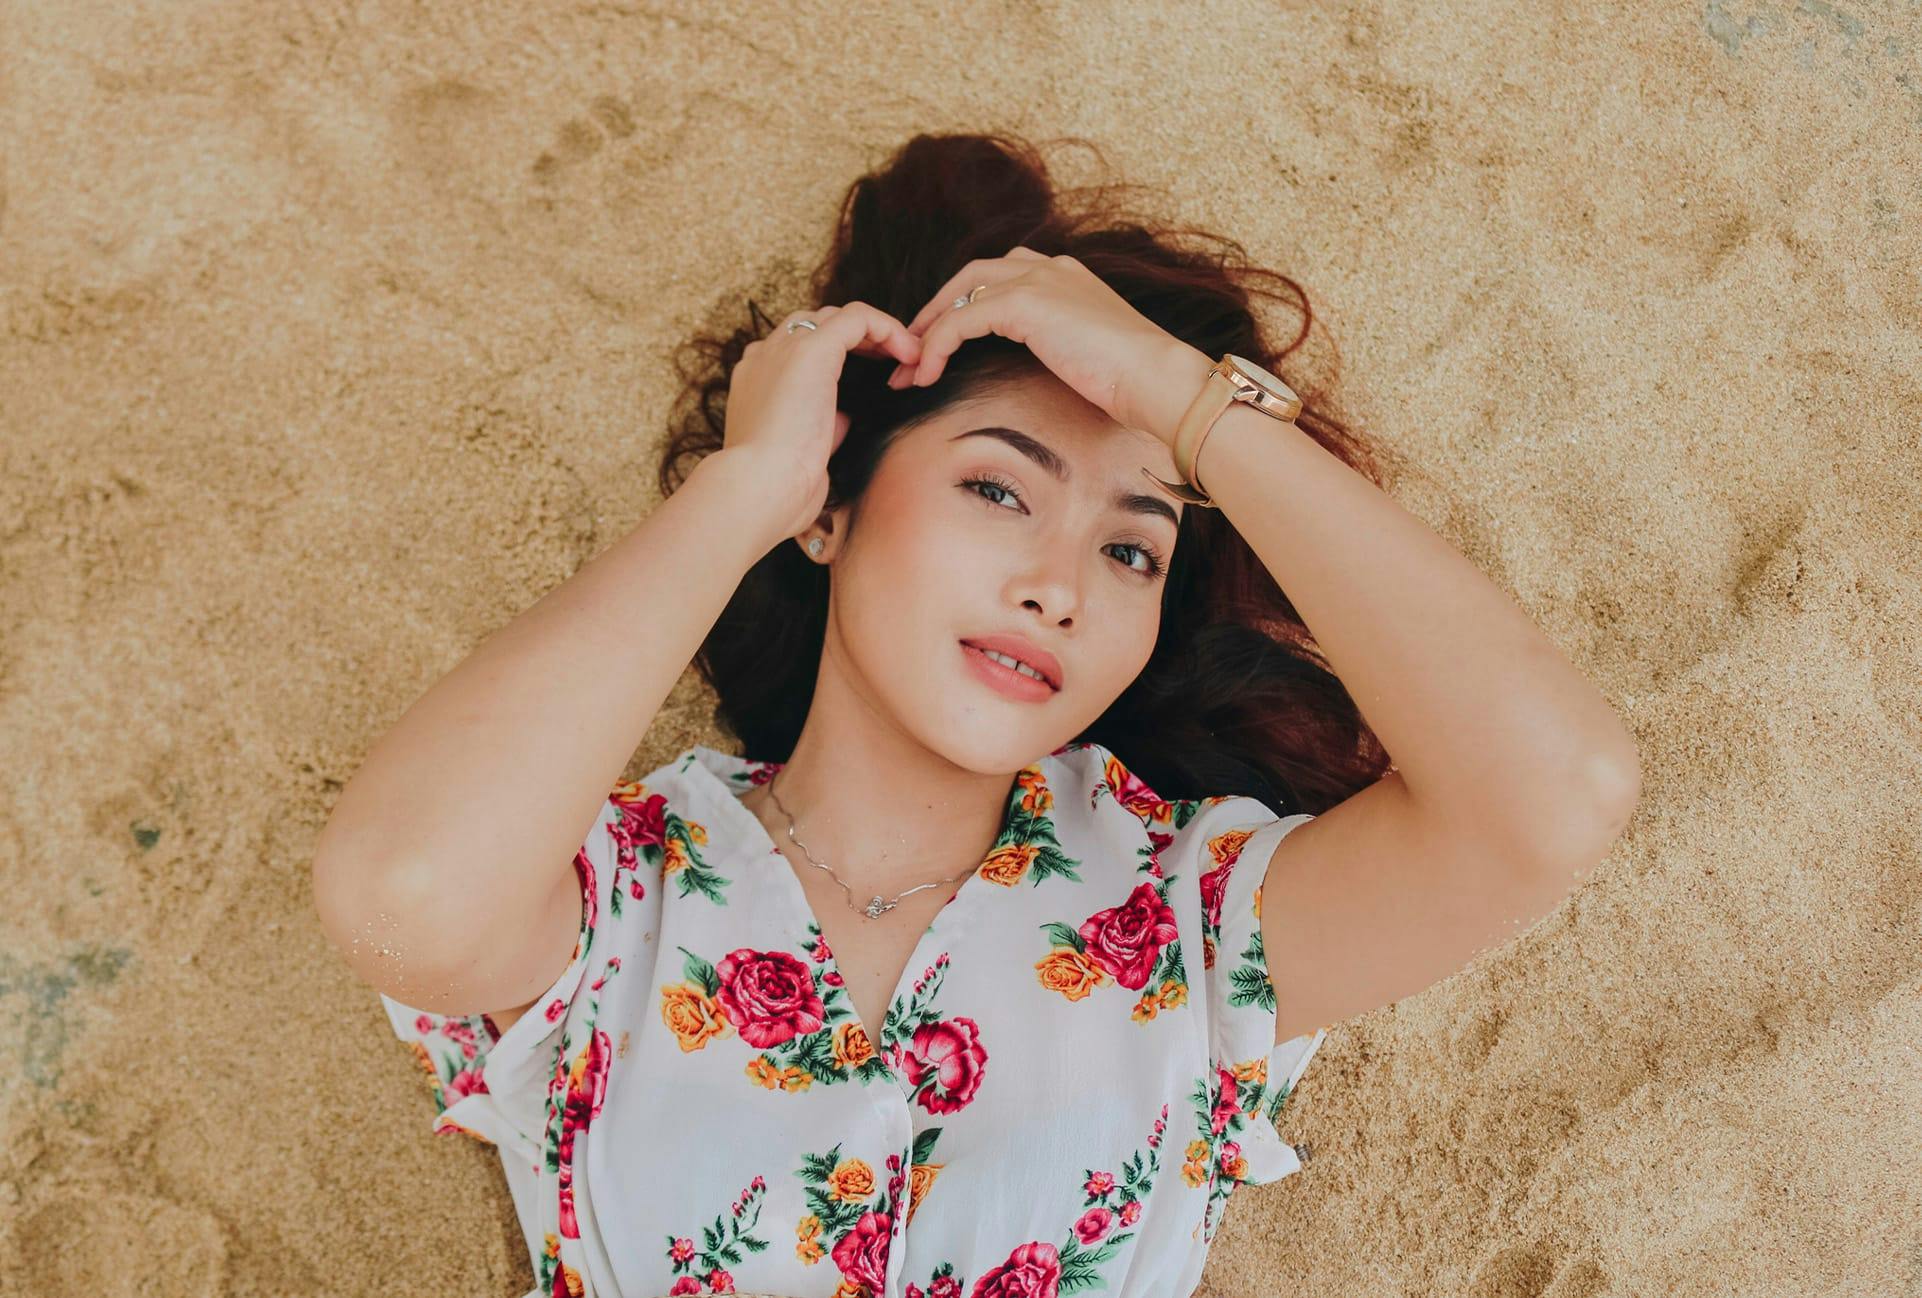 Woman in a flowery top lying in the sand